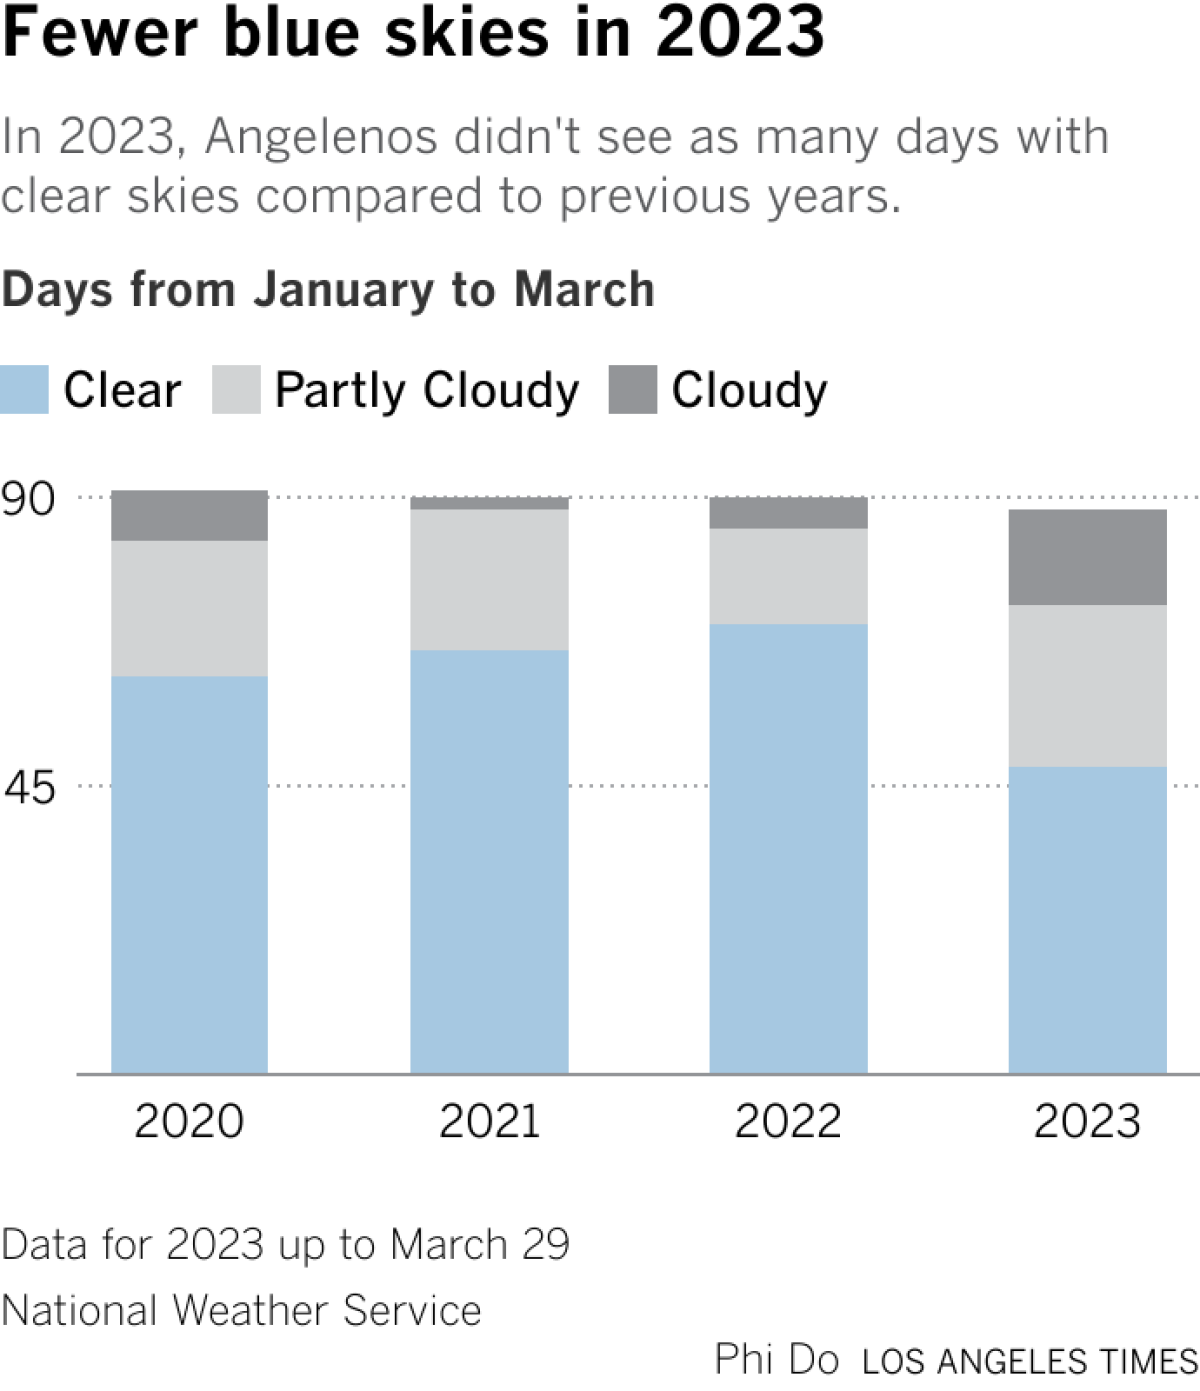 In 2023, Angelenos didn't see as many days with clear skies compared to previous years.